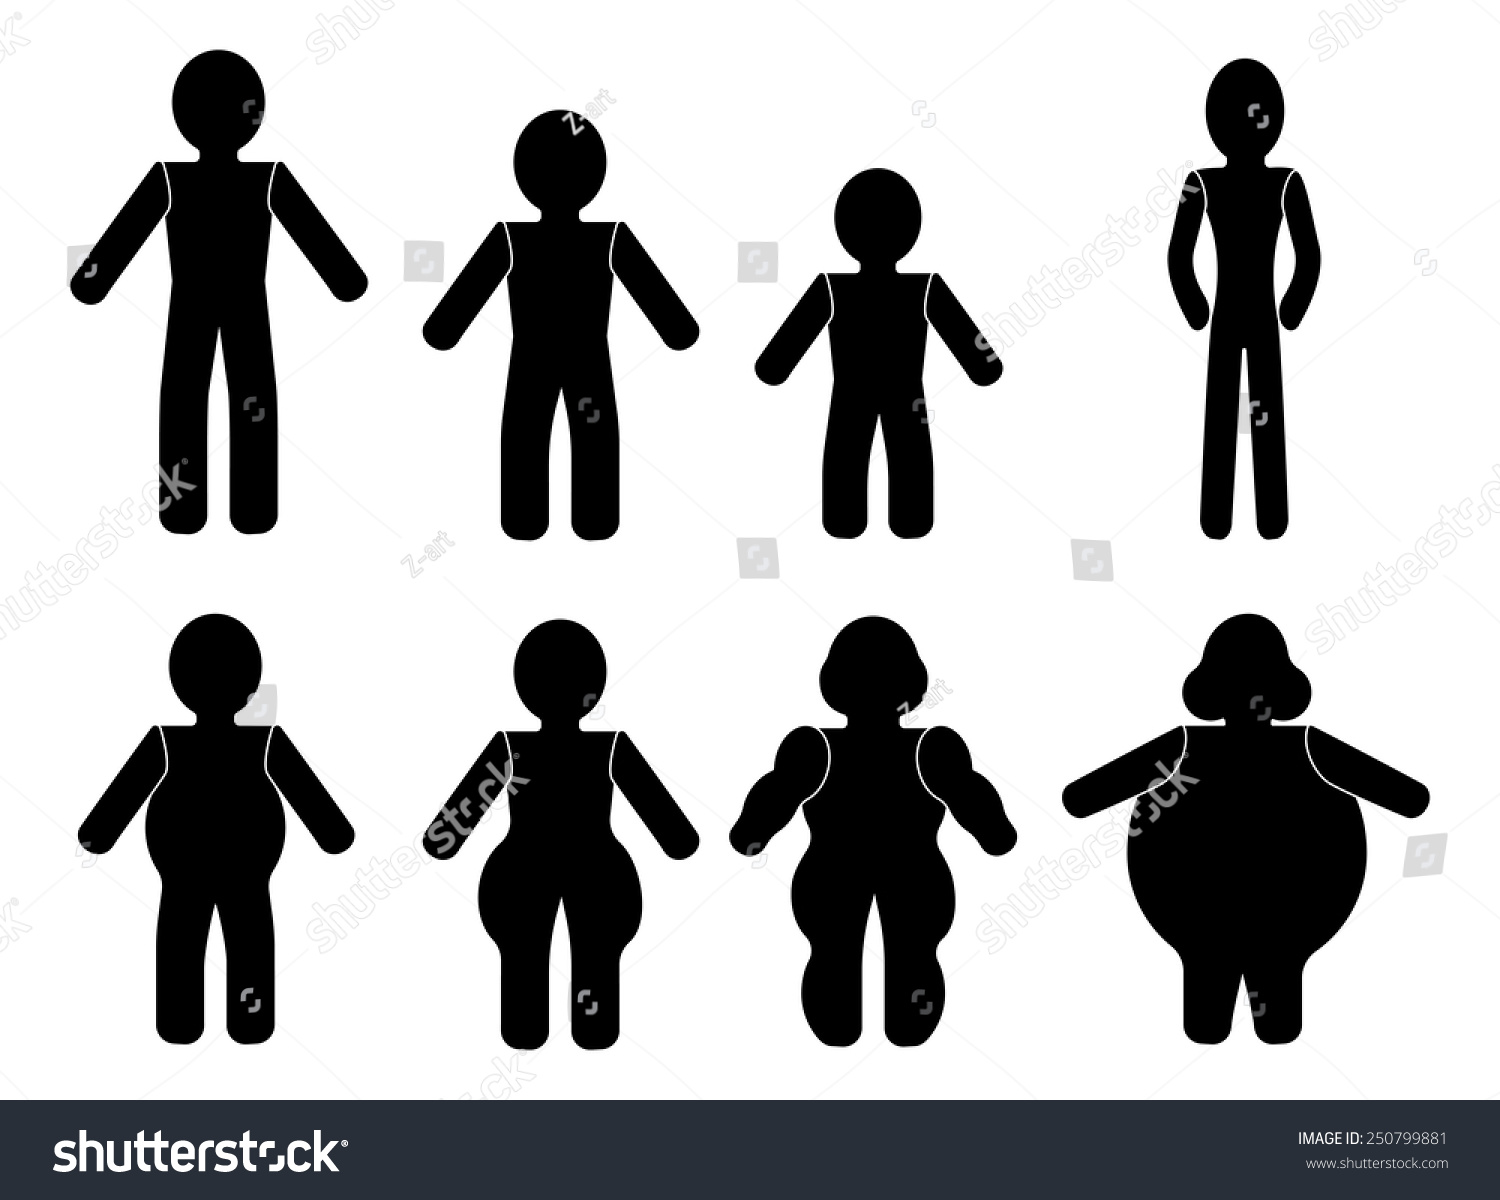 Weight Stages Stock Vector Illustration 250799881 : Shutterstock